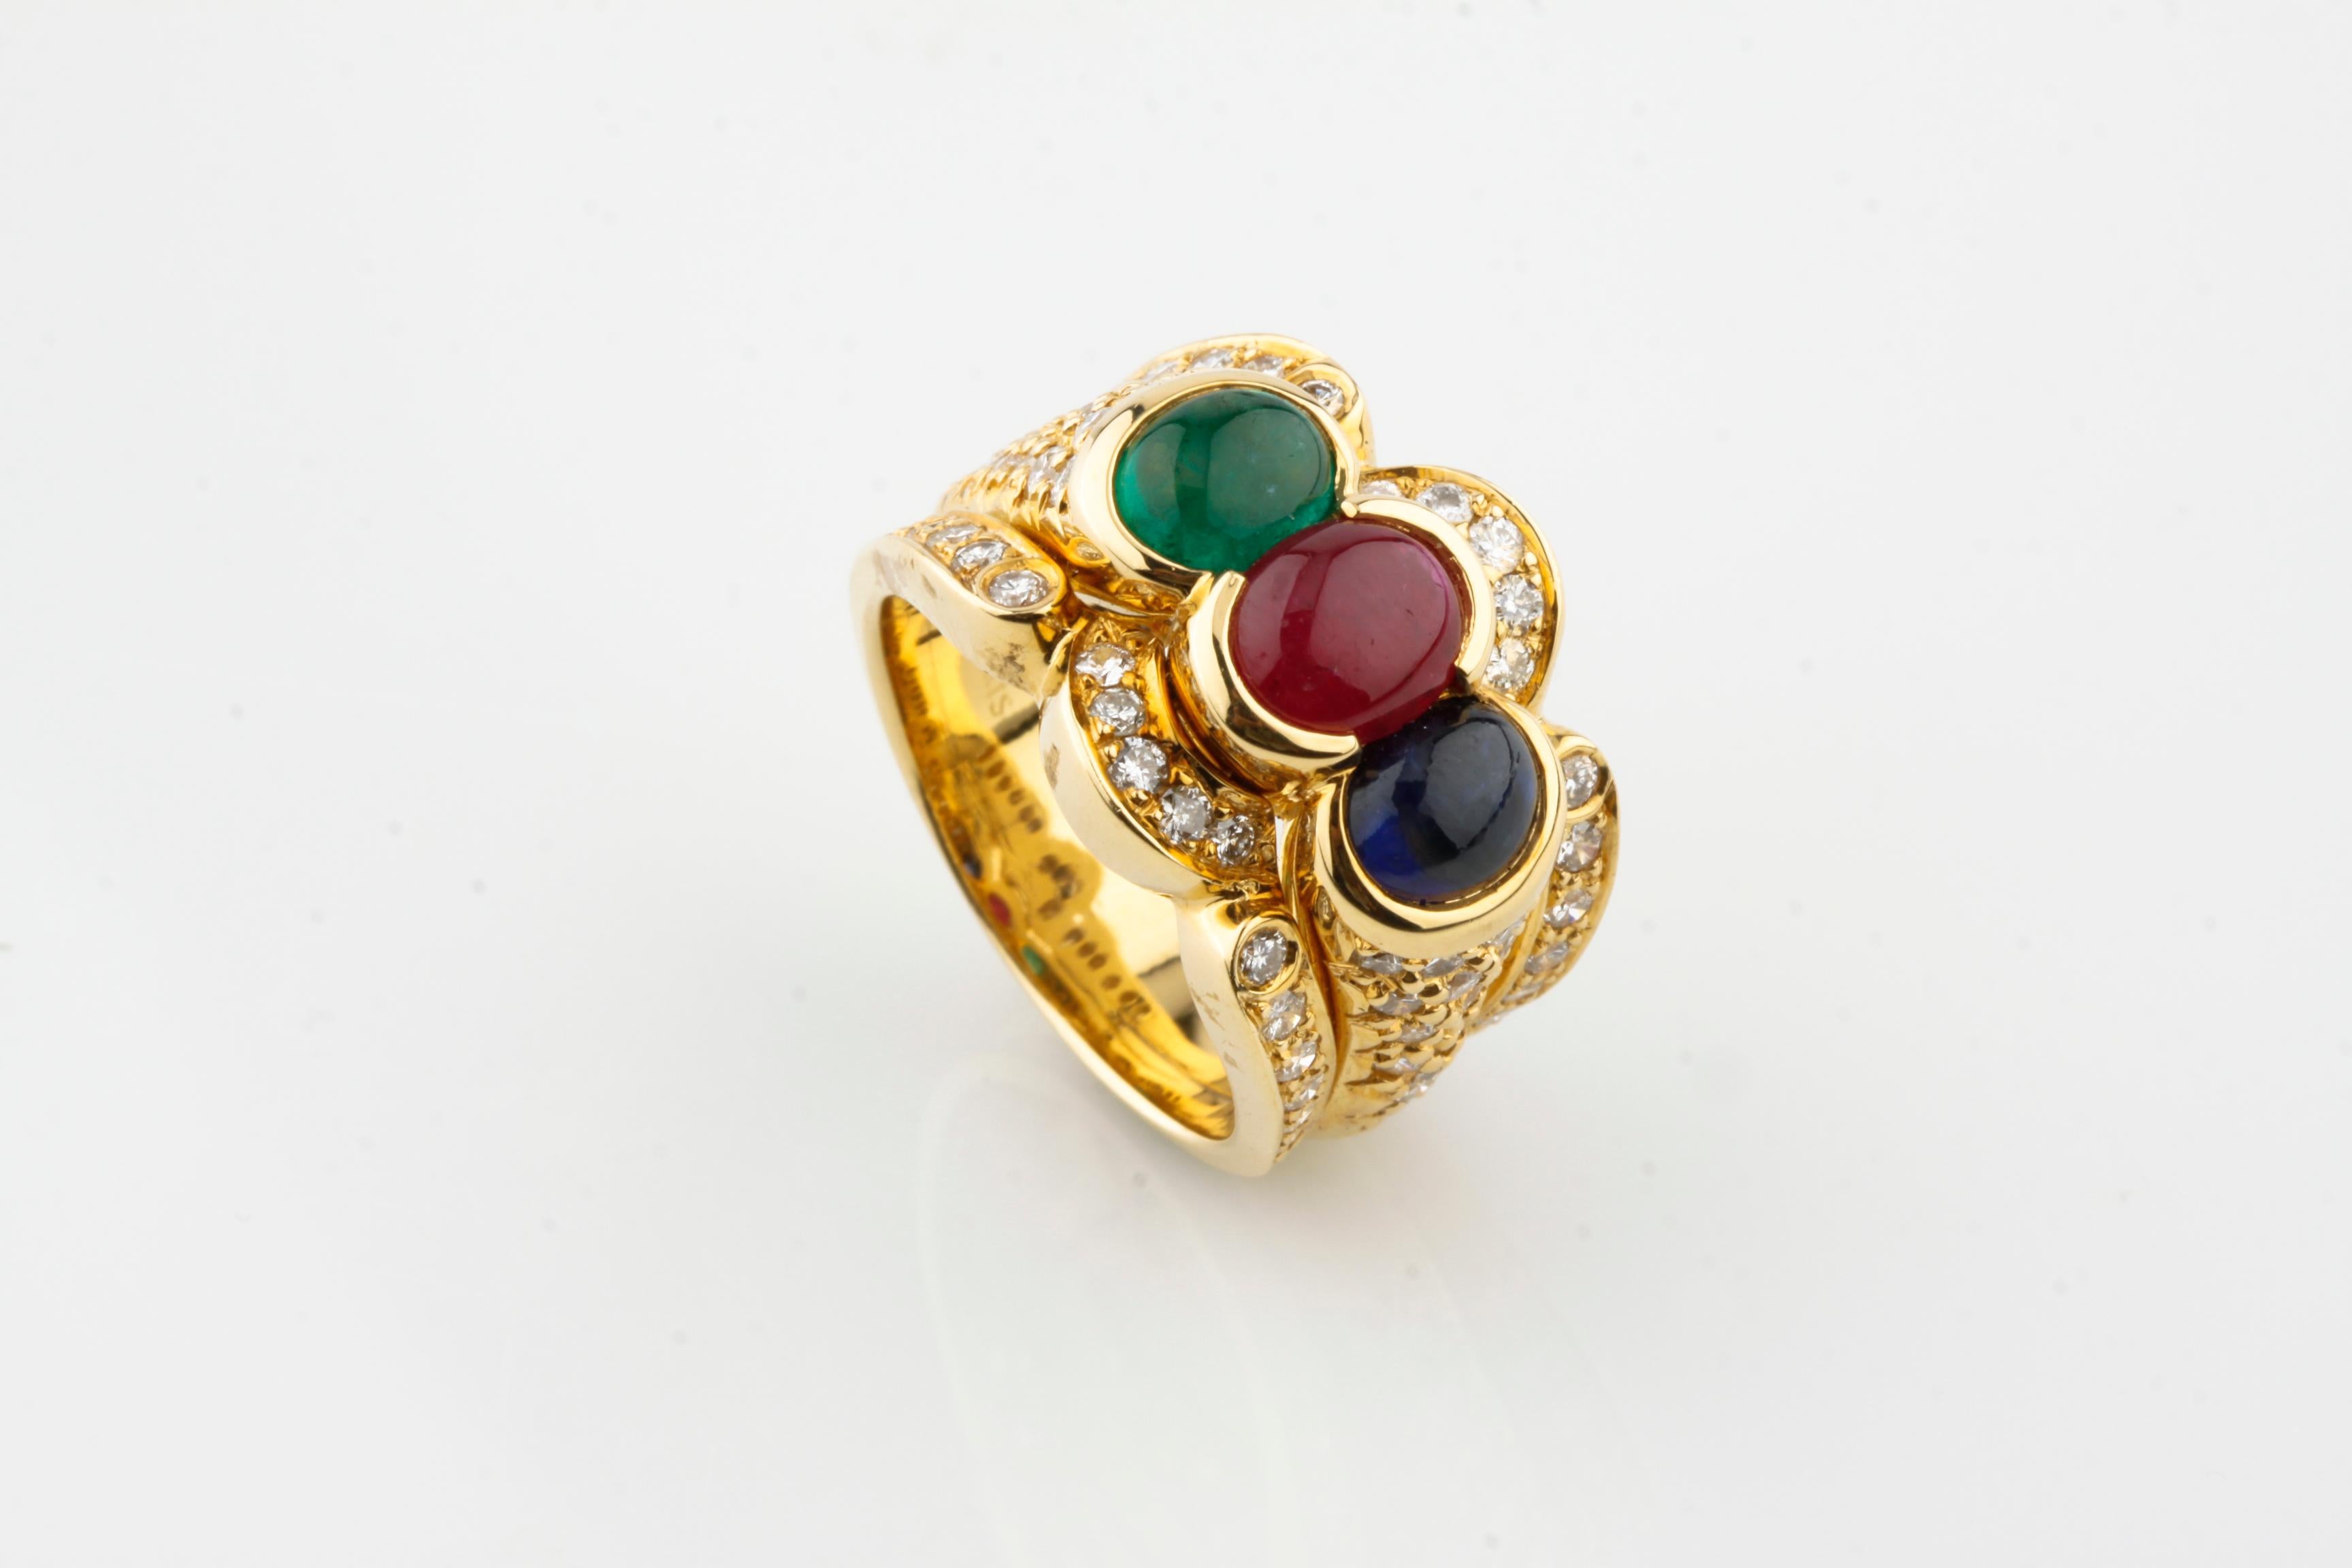 One Electronically tested 18k yellow gold ladies cast multi gemstone & diamond ring with a bright finish.

Condition Is Very Good.

Size 7

Containing:



One Half Bezel Set Oval Cabochon Cut Natural Ruby

Measuring 7.30 x 6.00 x 2.70 mm
Approximate